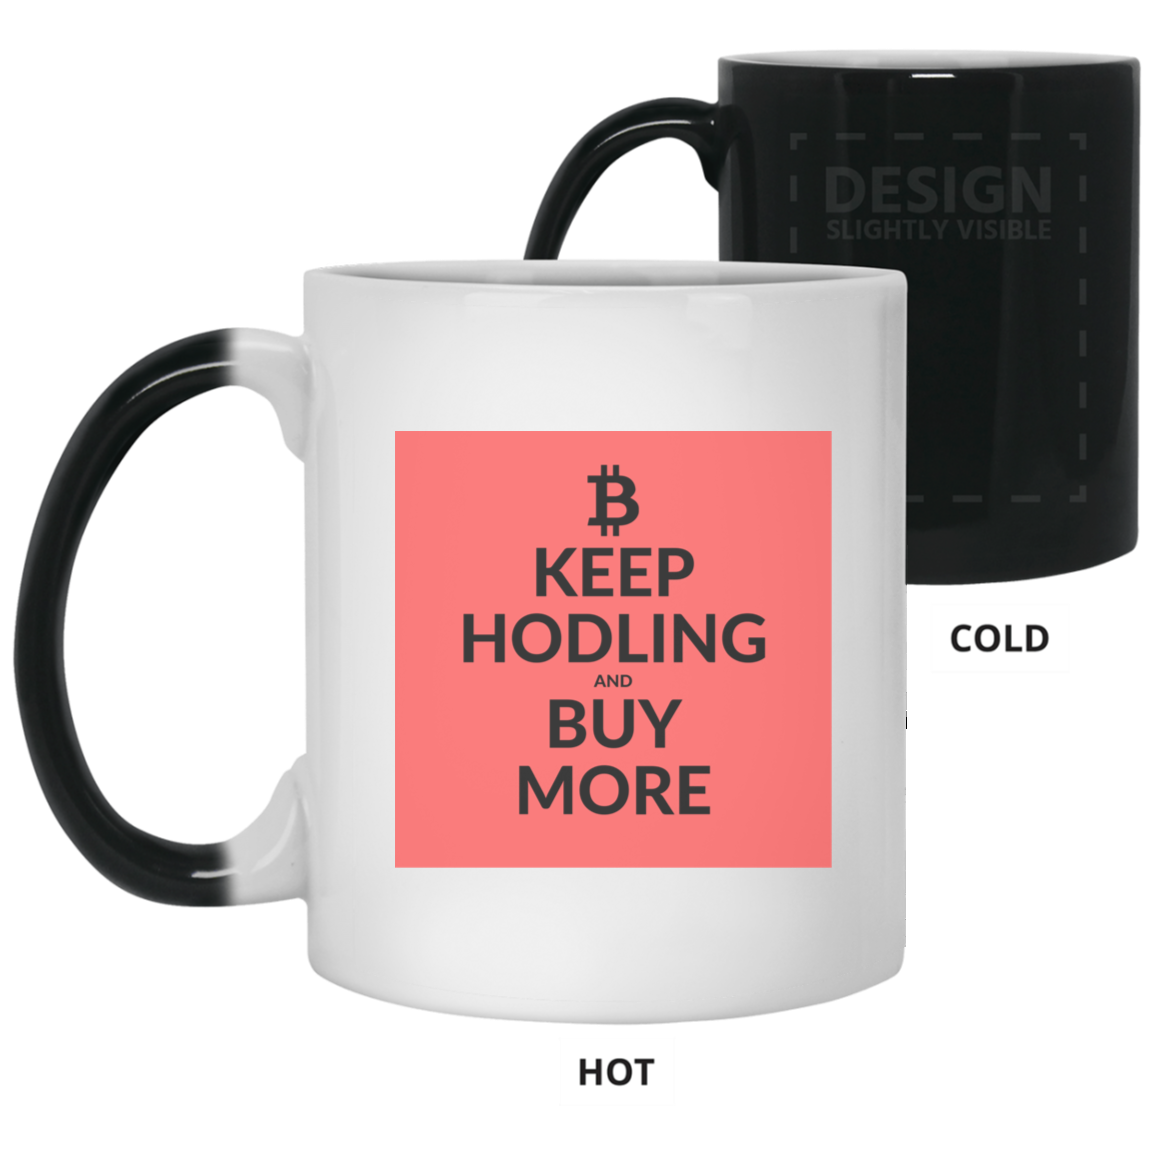 Keep hodling - 11 oz. Color Changing Mug TCP1607 White / One Size Official Crypto  Merch